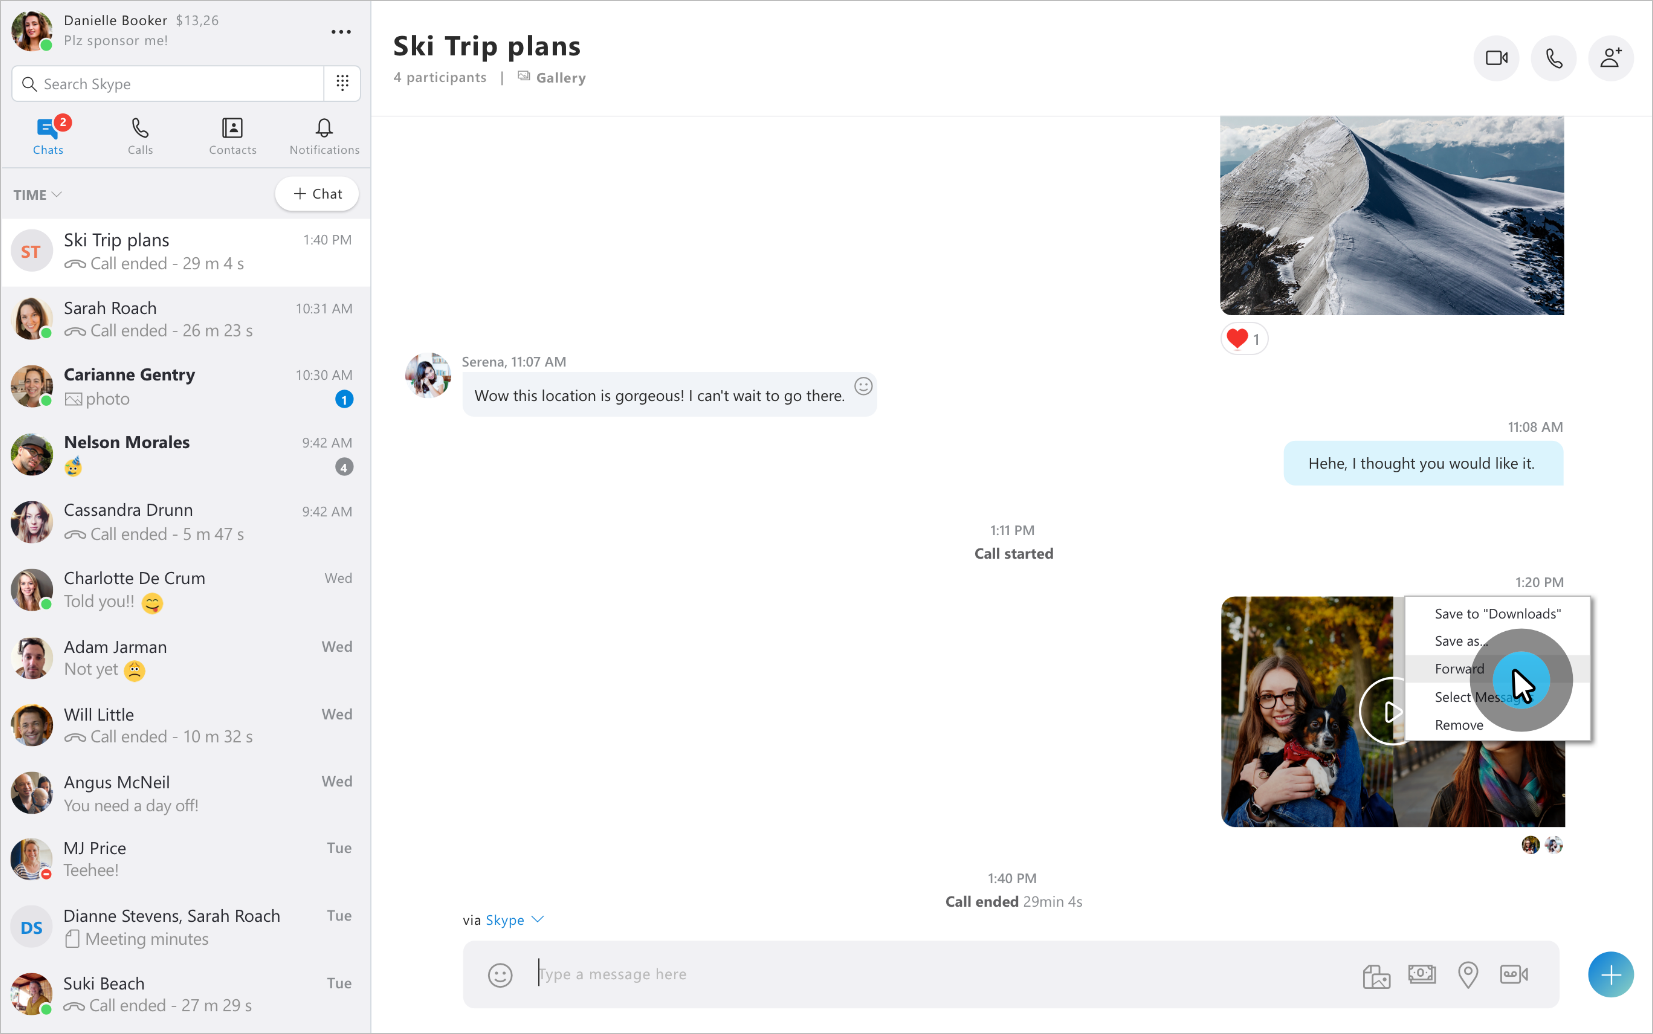 Skype Preview version 8.43.76.38 Introduces Screen Sharing on Mobile Introducing-Skype-call-recording-7-1.png